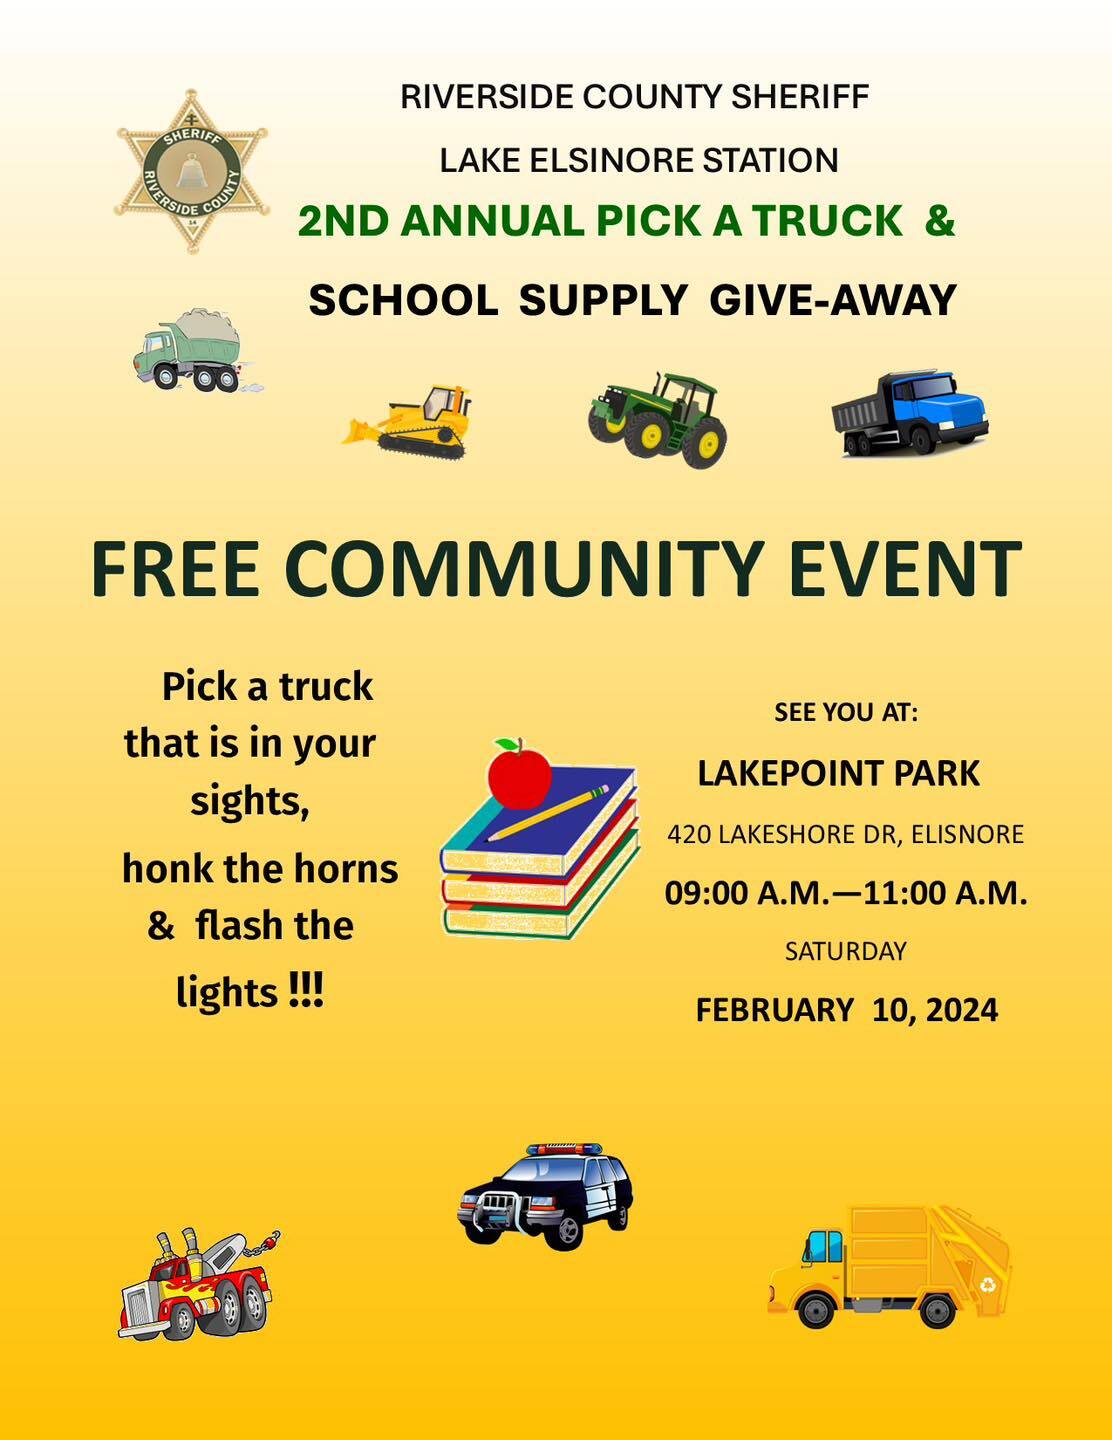 RivCo Sheriff Lake Elsinore 2nd Annual Pick a Truck & School Supply Give-Away